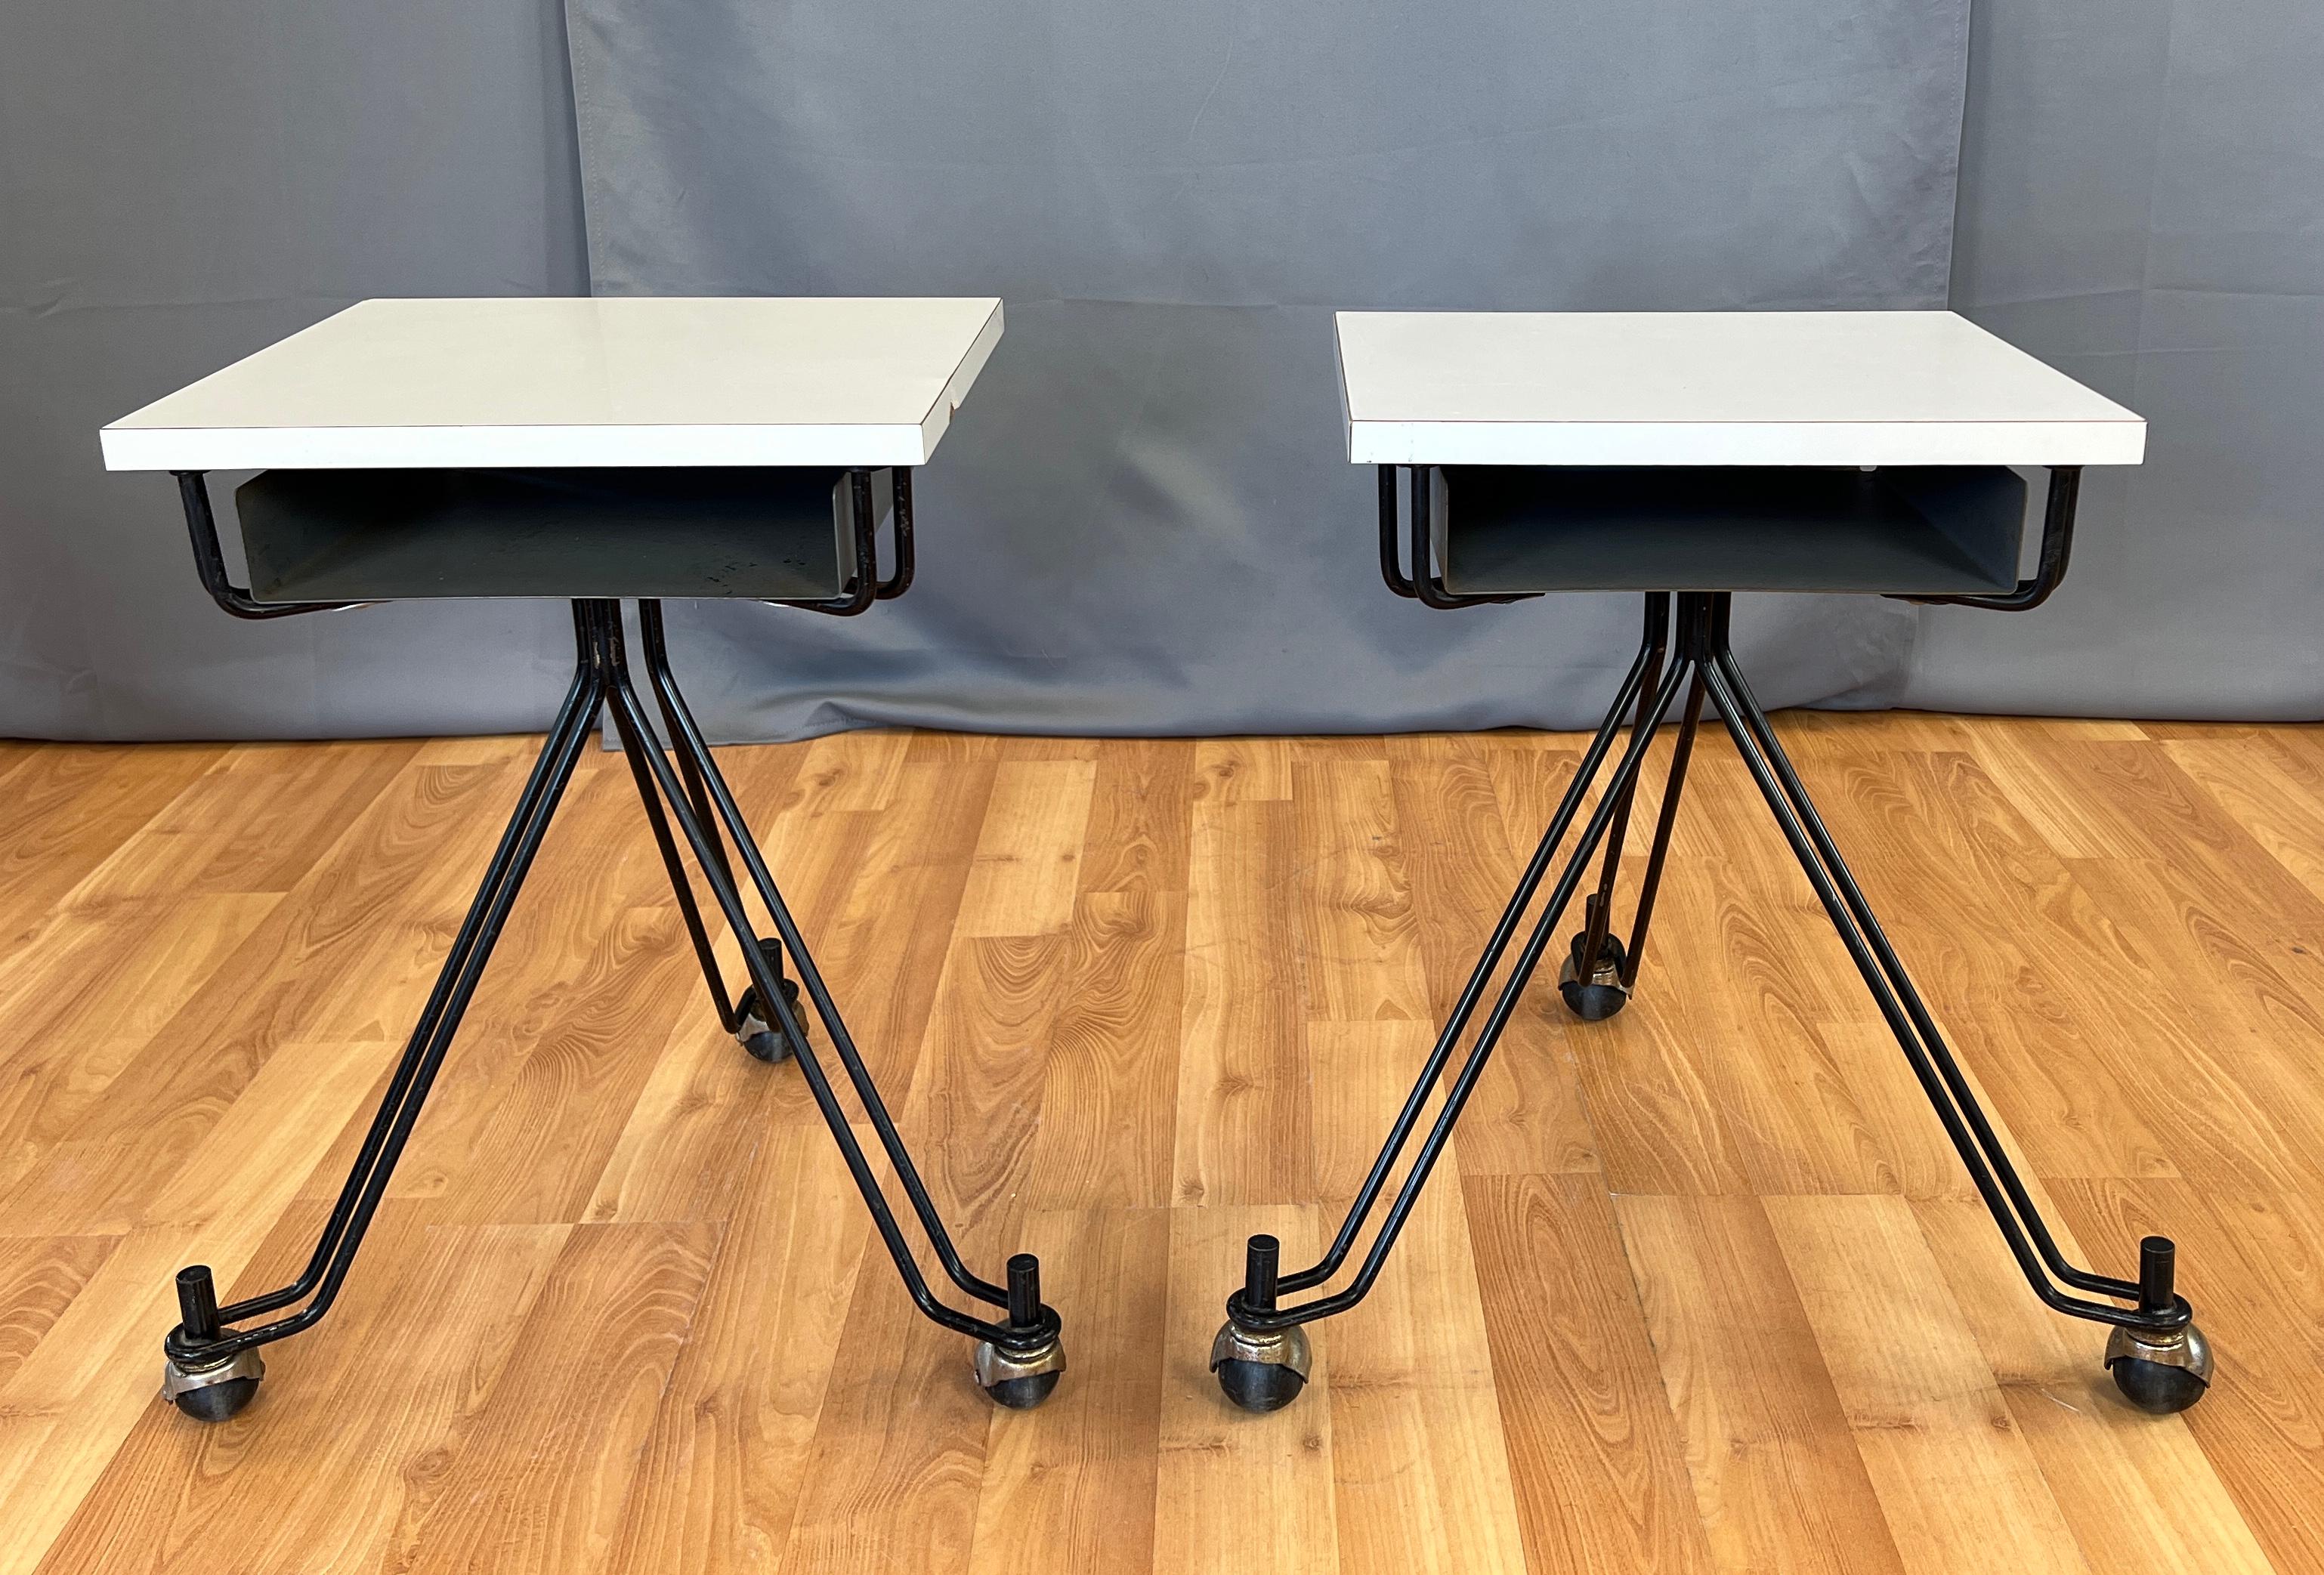 Offered here are a pair Eliot Noyes designed telephone tables for IBM corporate offices circa 1950s
Eliot is most notably known for the IBM Selectric typewriter.
Square white formica top, below a storage space (for a phone book) that's 2 3/4